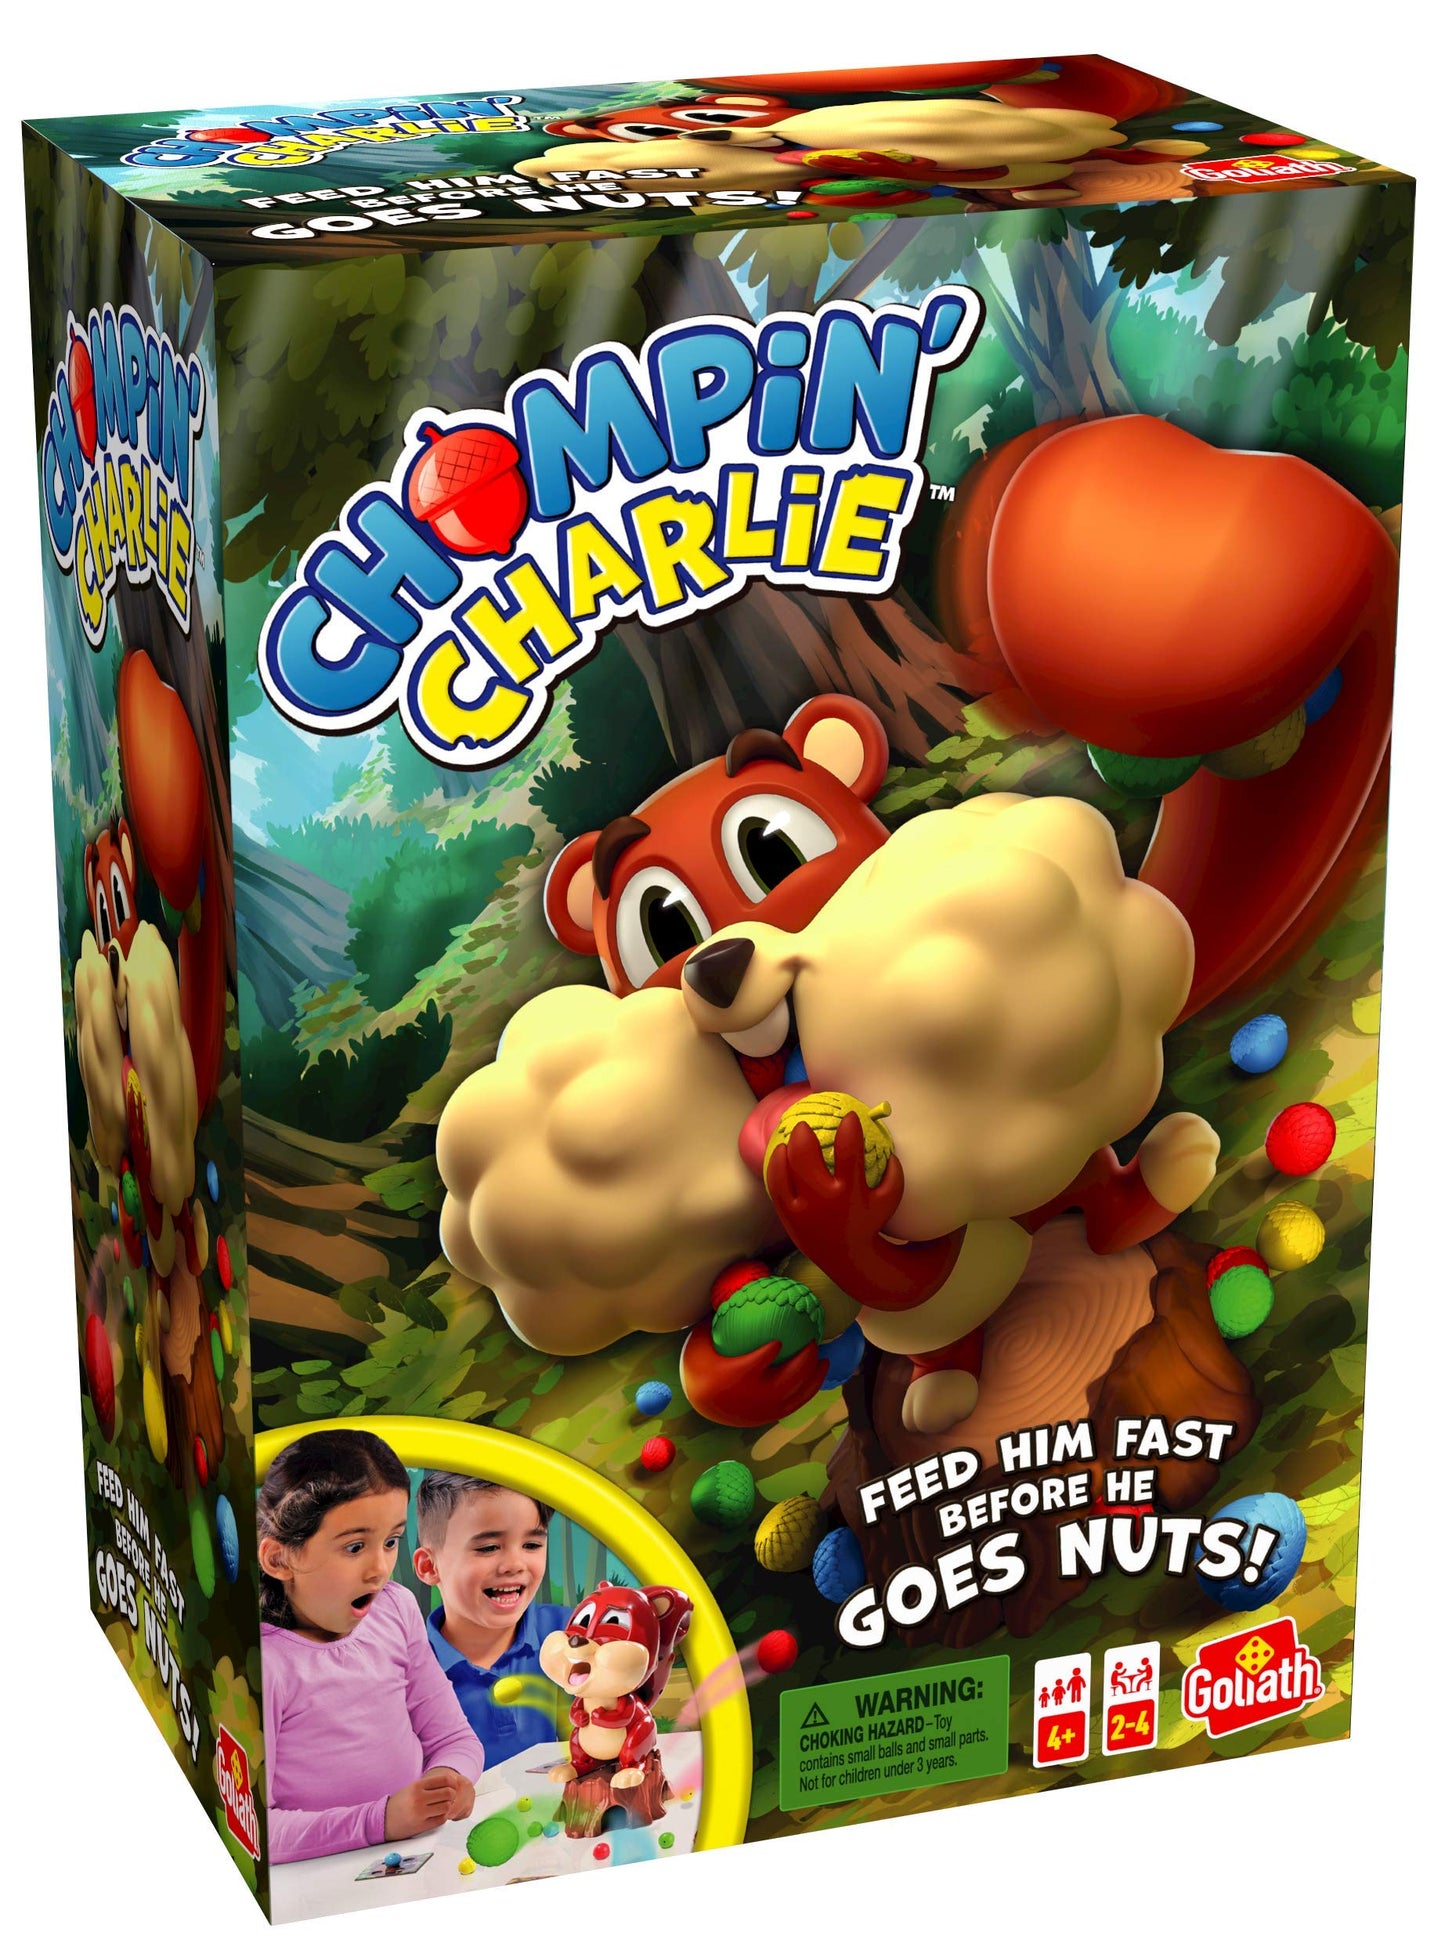 Chompin' Charlie Game - Feed The Squirrel Acorns and Race to Collect Them When They Scatter by Goliath